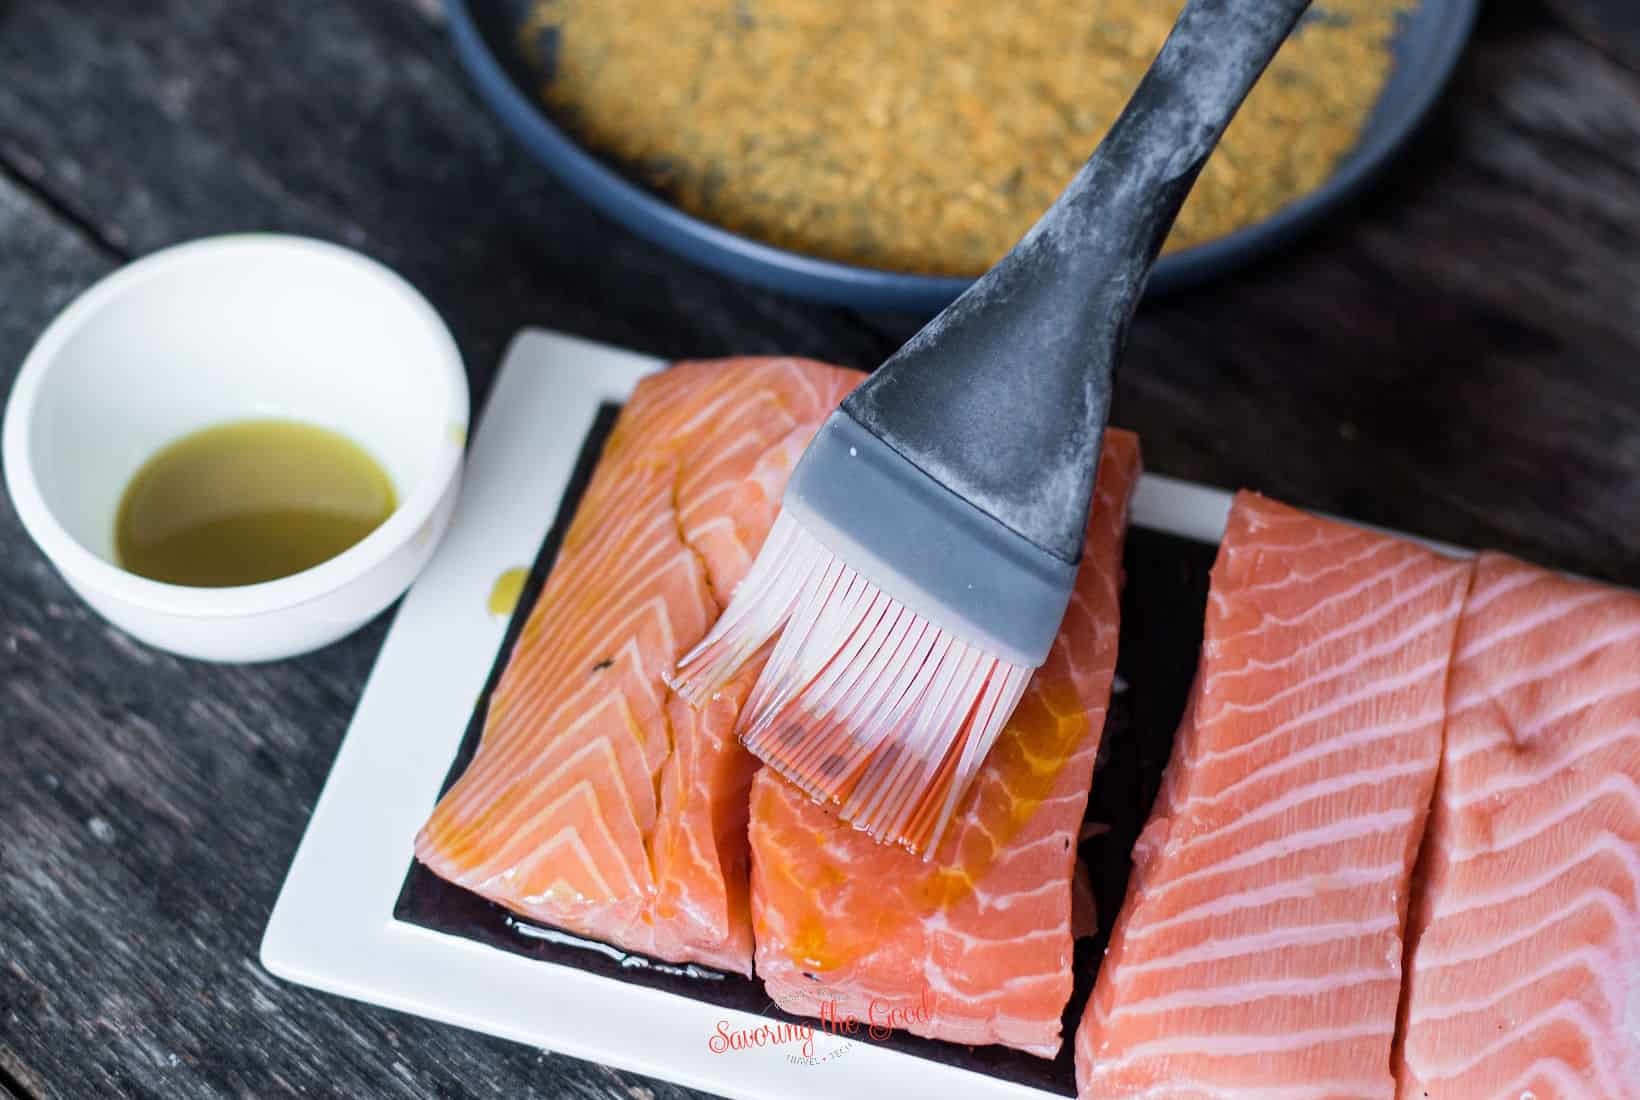 silicone pastry brush applying olive oil to the raw salmon filets.